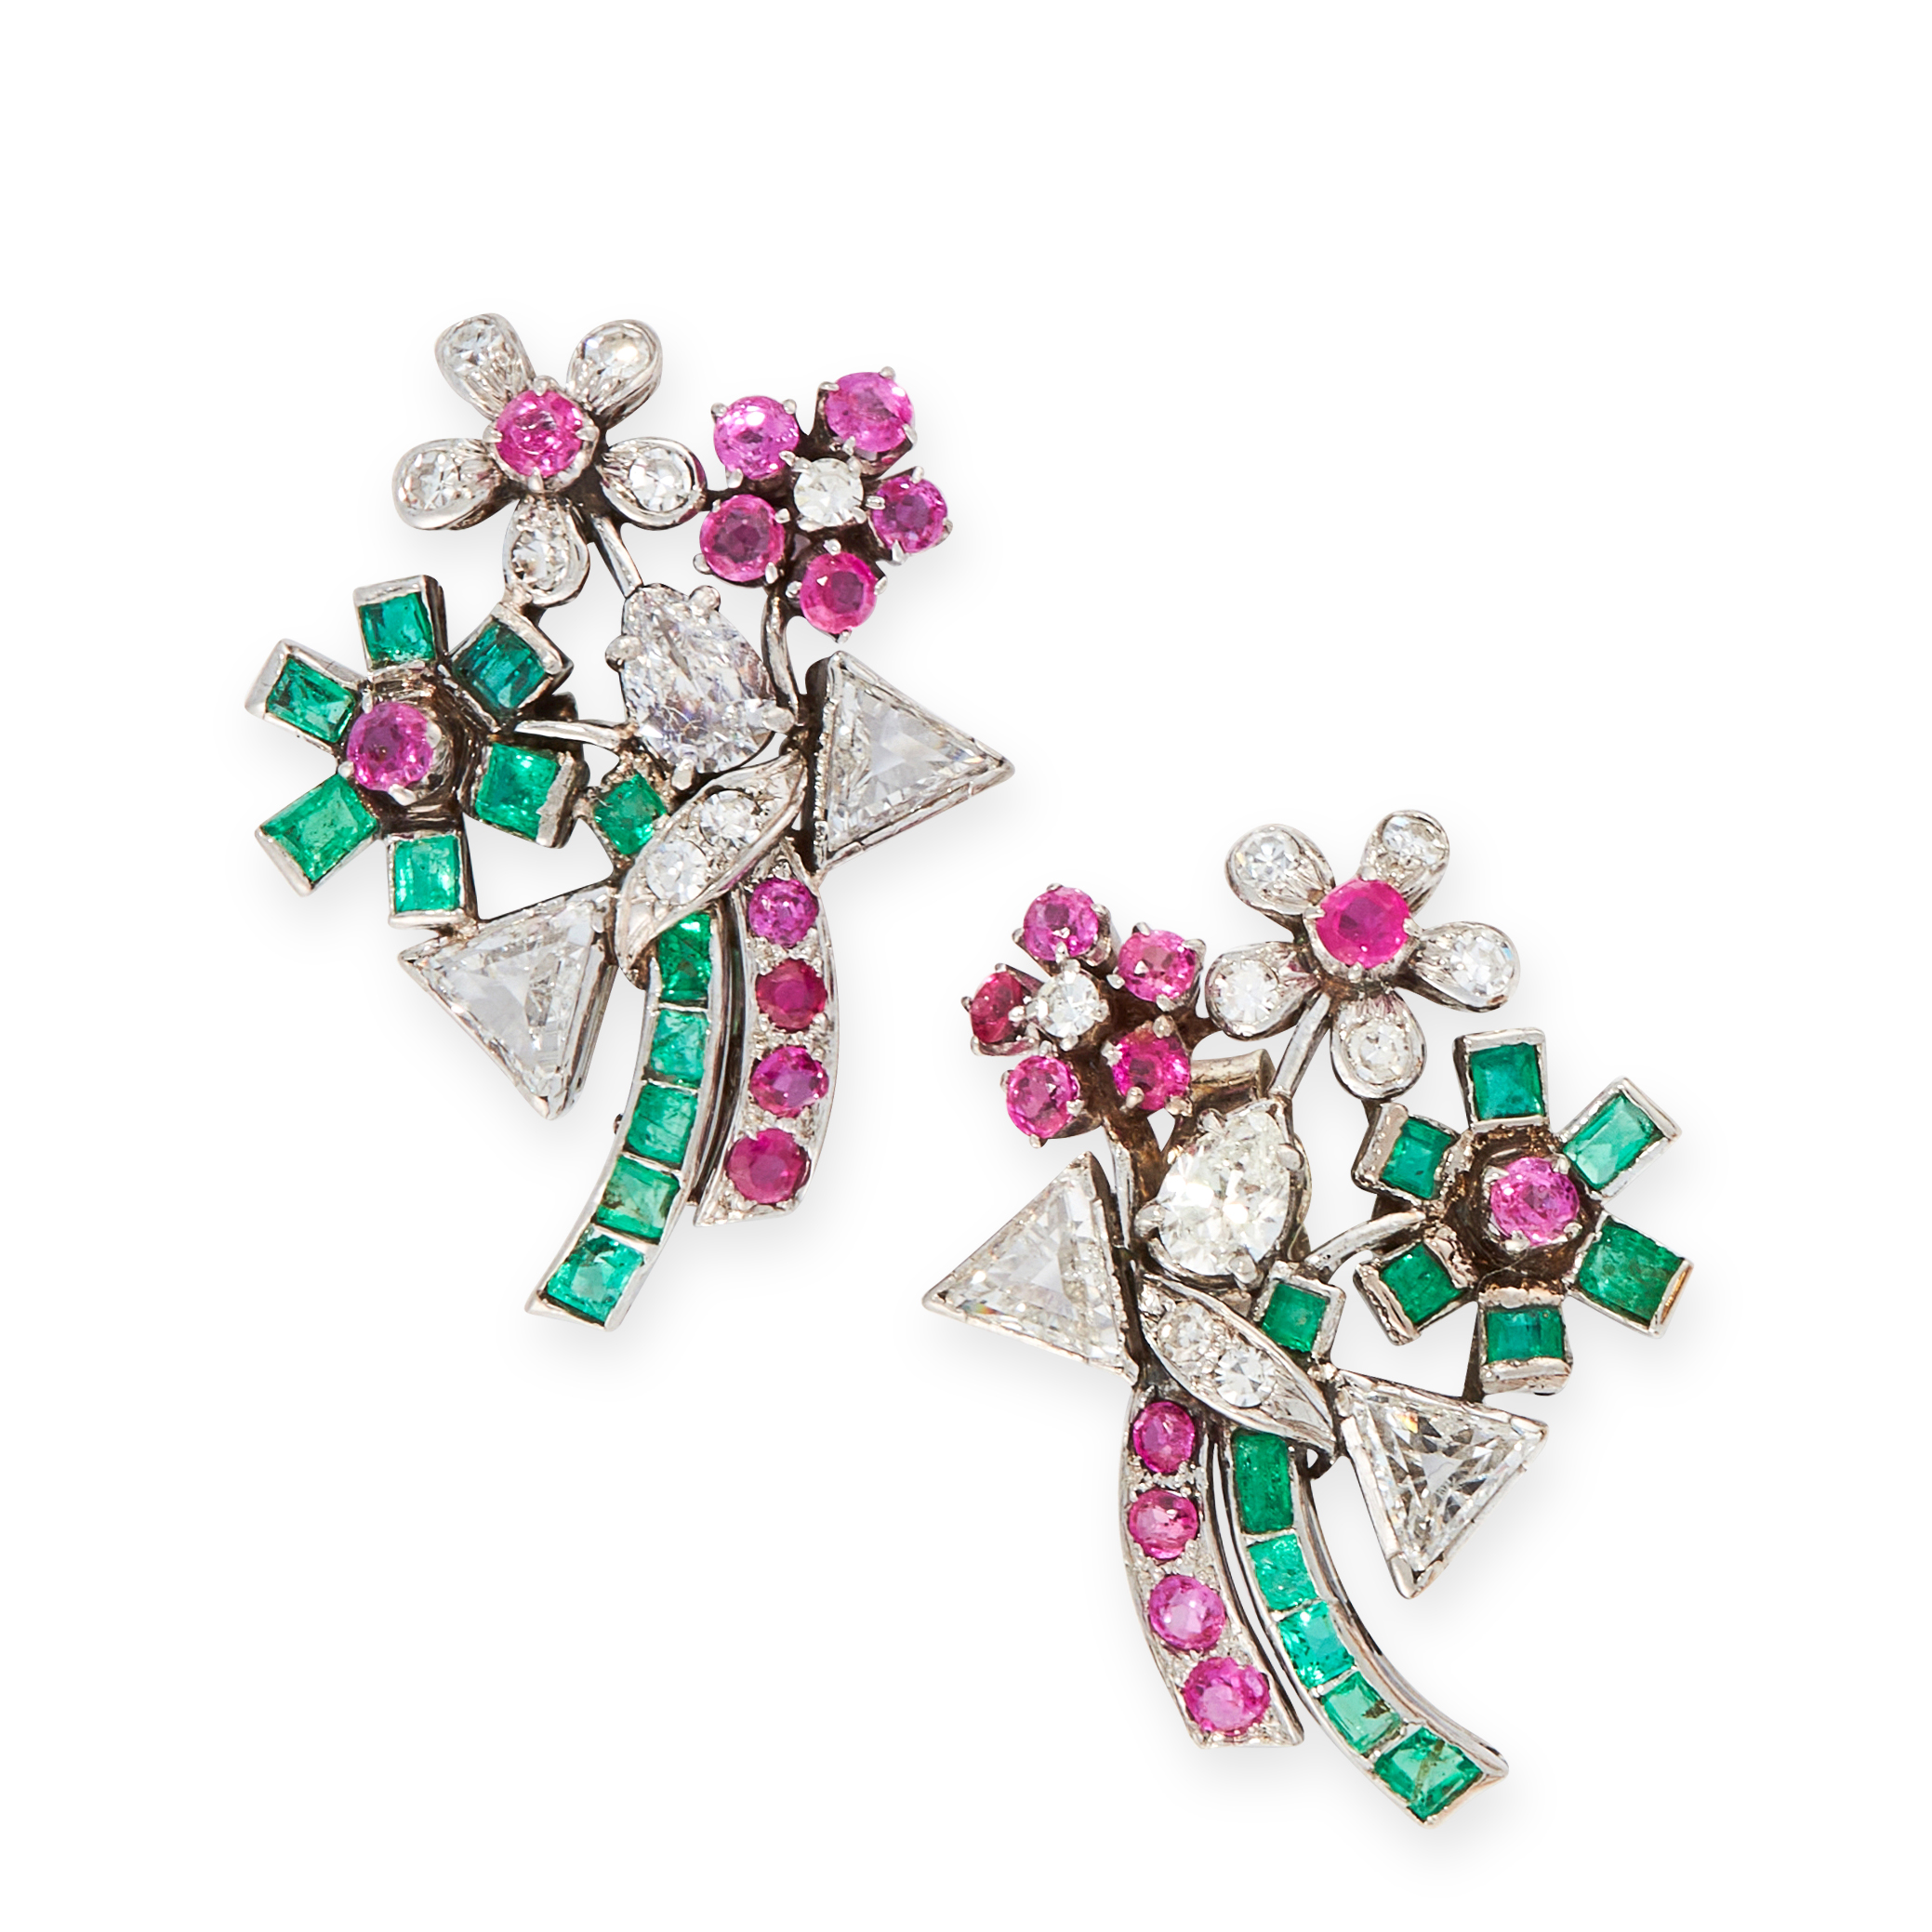 A PAIR OF DIAMOND, EMERALD AND RUBY EARRINGS designed as bouquets of flowers, set with round, pear